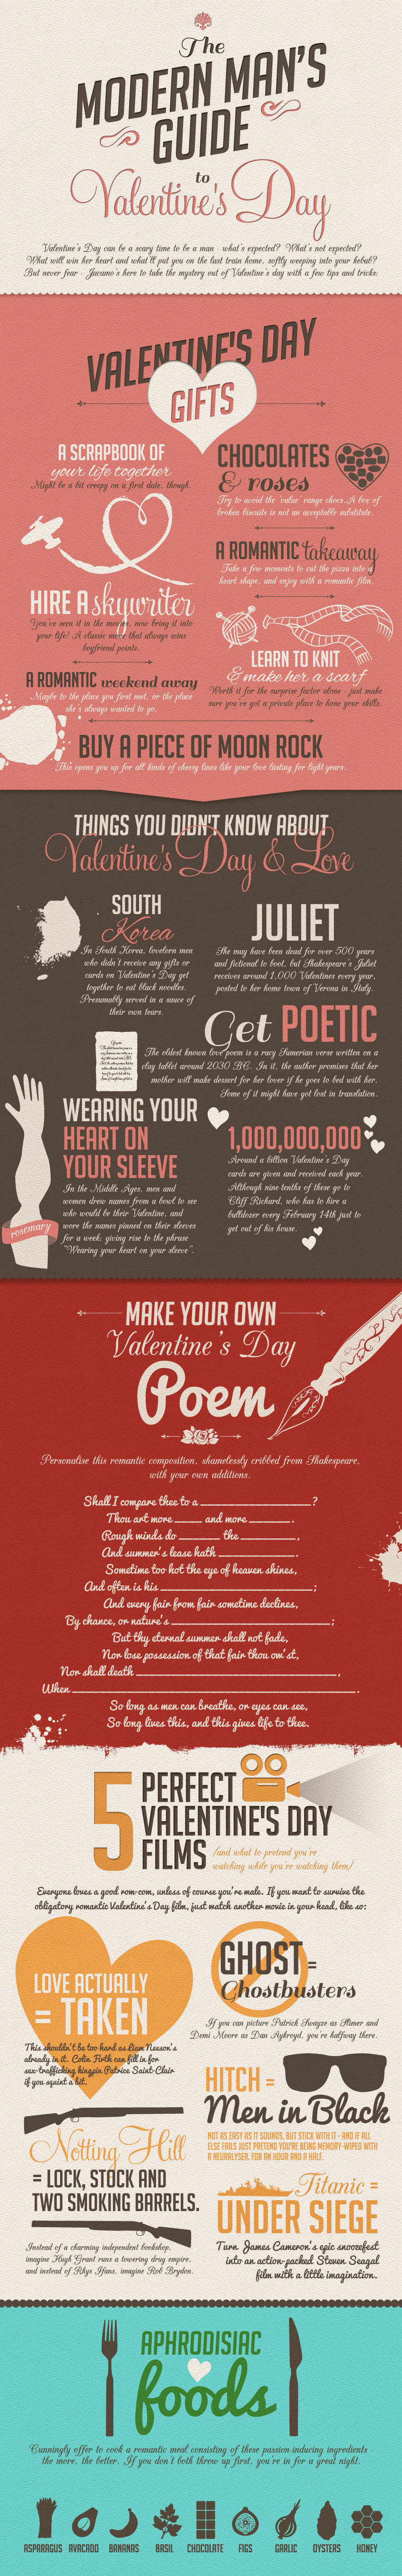 The Modern Man's Guide to Valentine's Day Infographic